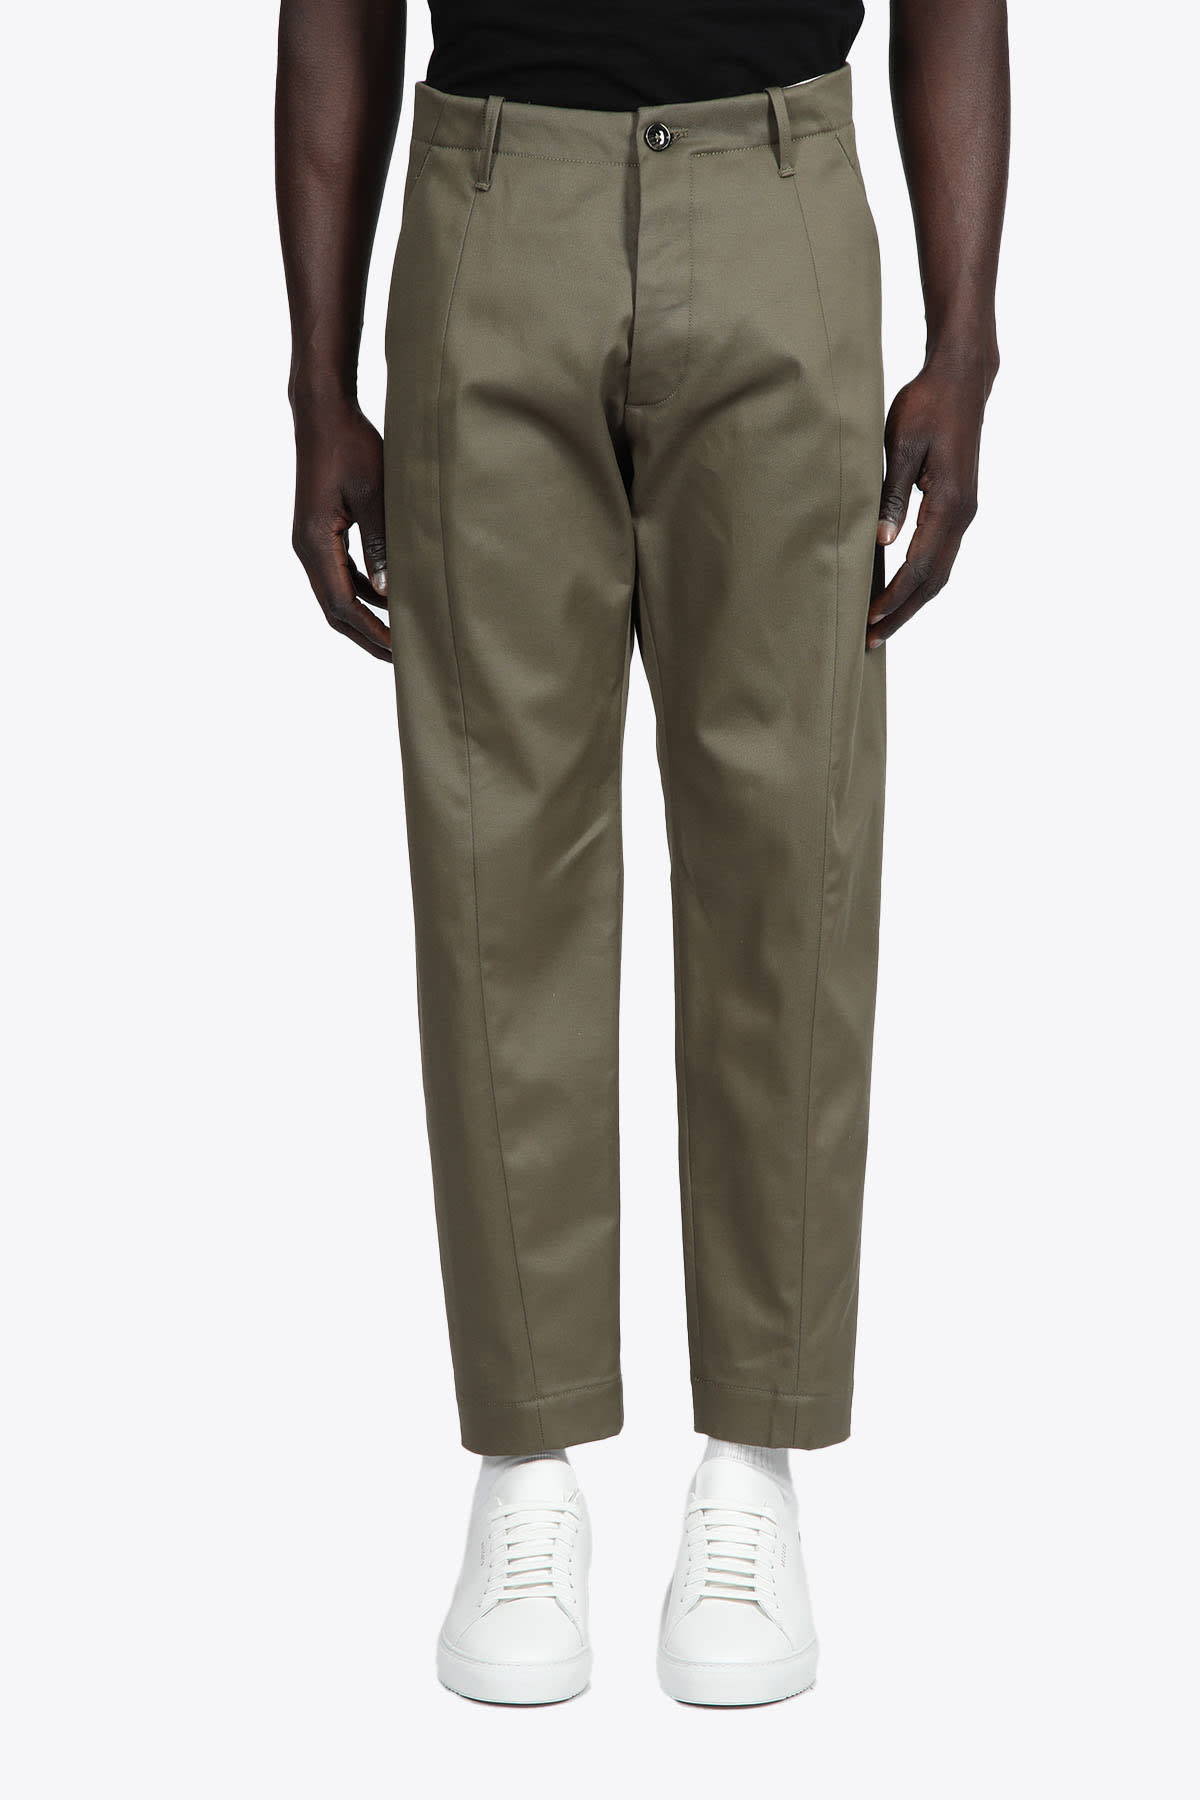 Nine in the Morning Kent Man - Chino Over Man Olive green cotton twill trousers - Kent